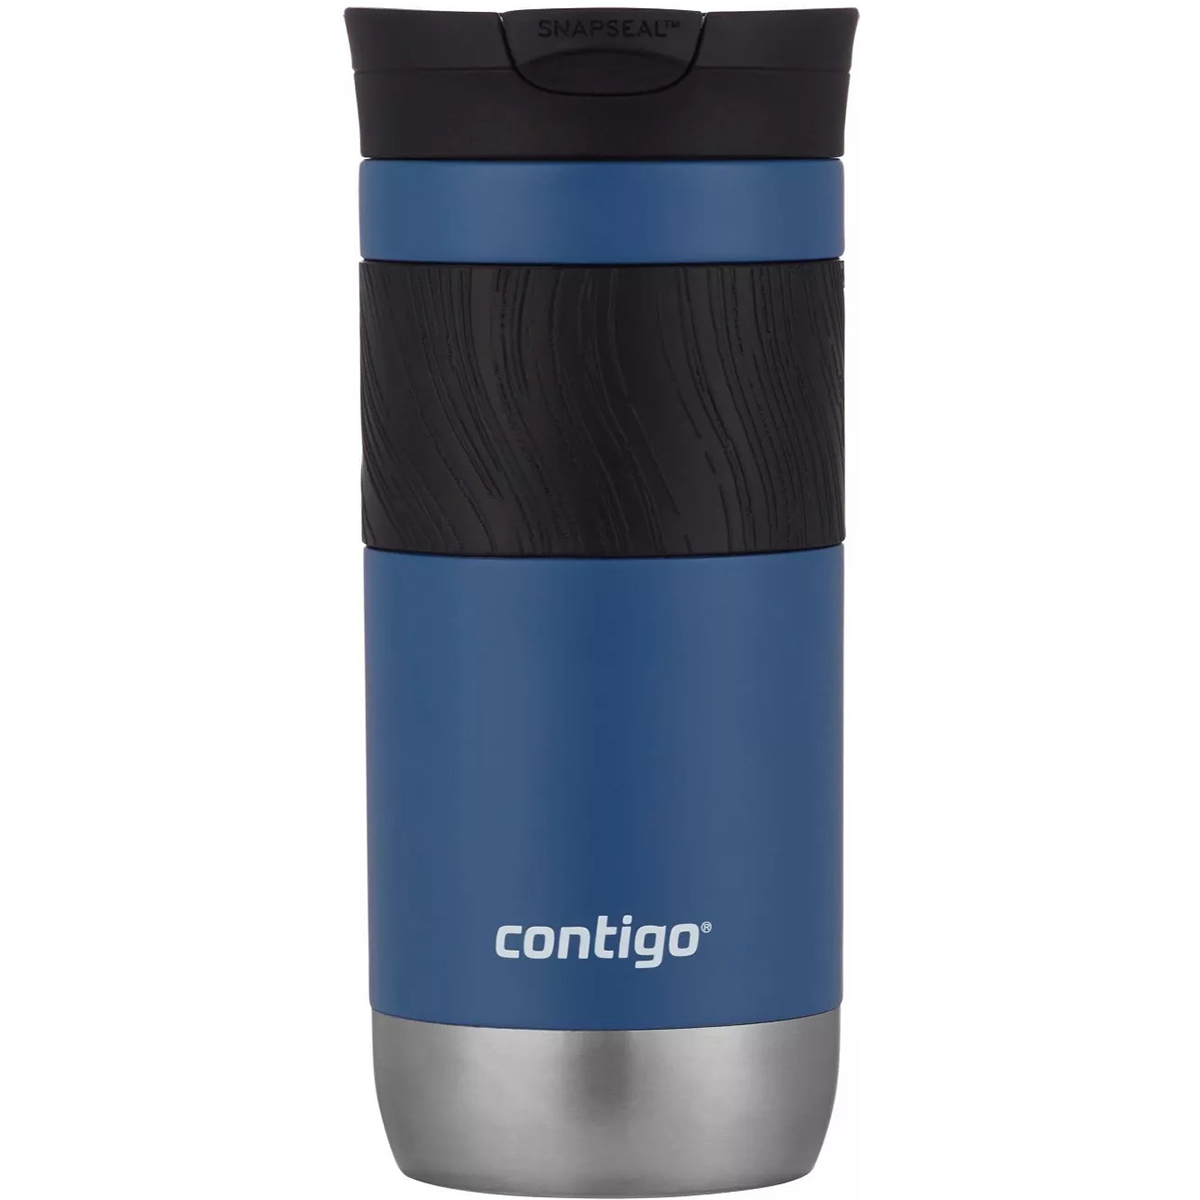 Contigo Byron 2.0 Stainless Steel Travel Mug with SNAPSEAL Lid and Grip Sake and Blue Corn, 16 fl oz., 2-Pack - image 3 of 11